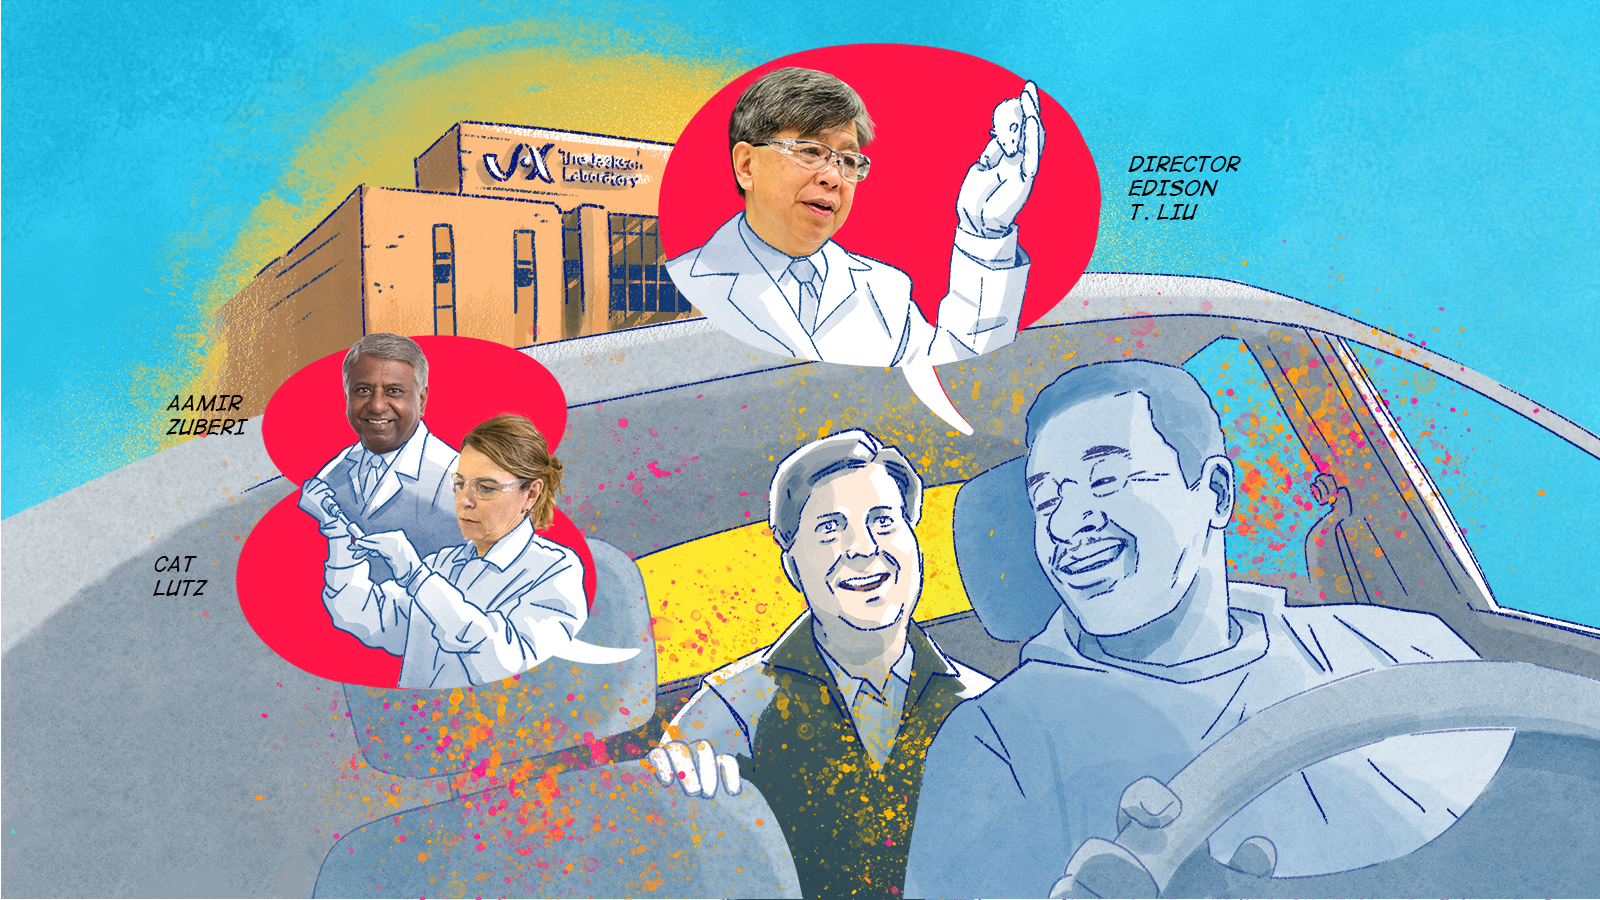  Illustrations of Edison T. Liu, scientists Aamir Zuberi and Cat Lutz, and a man and cab driver talking in a car. A drawing of a lab is on the horizon. 